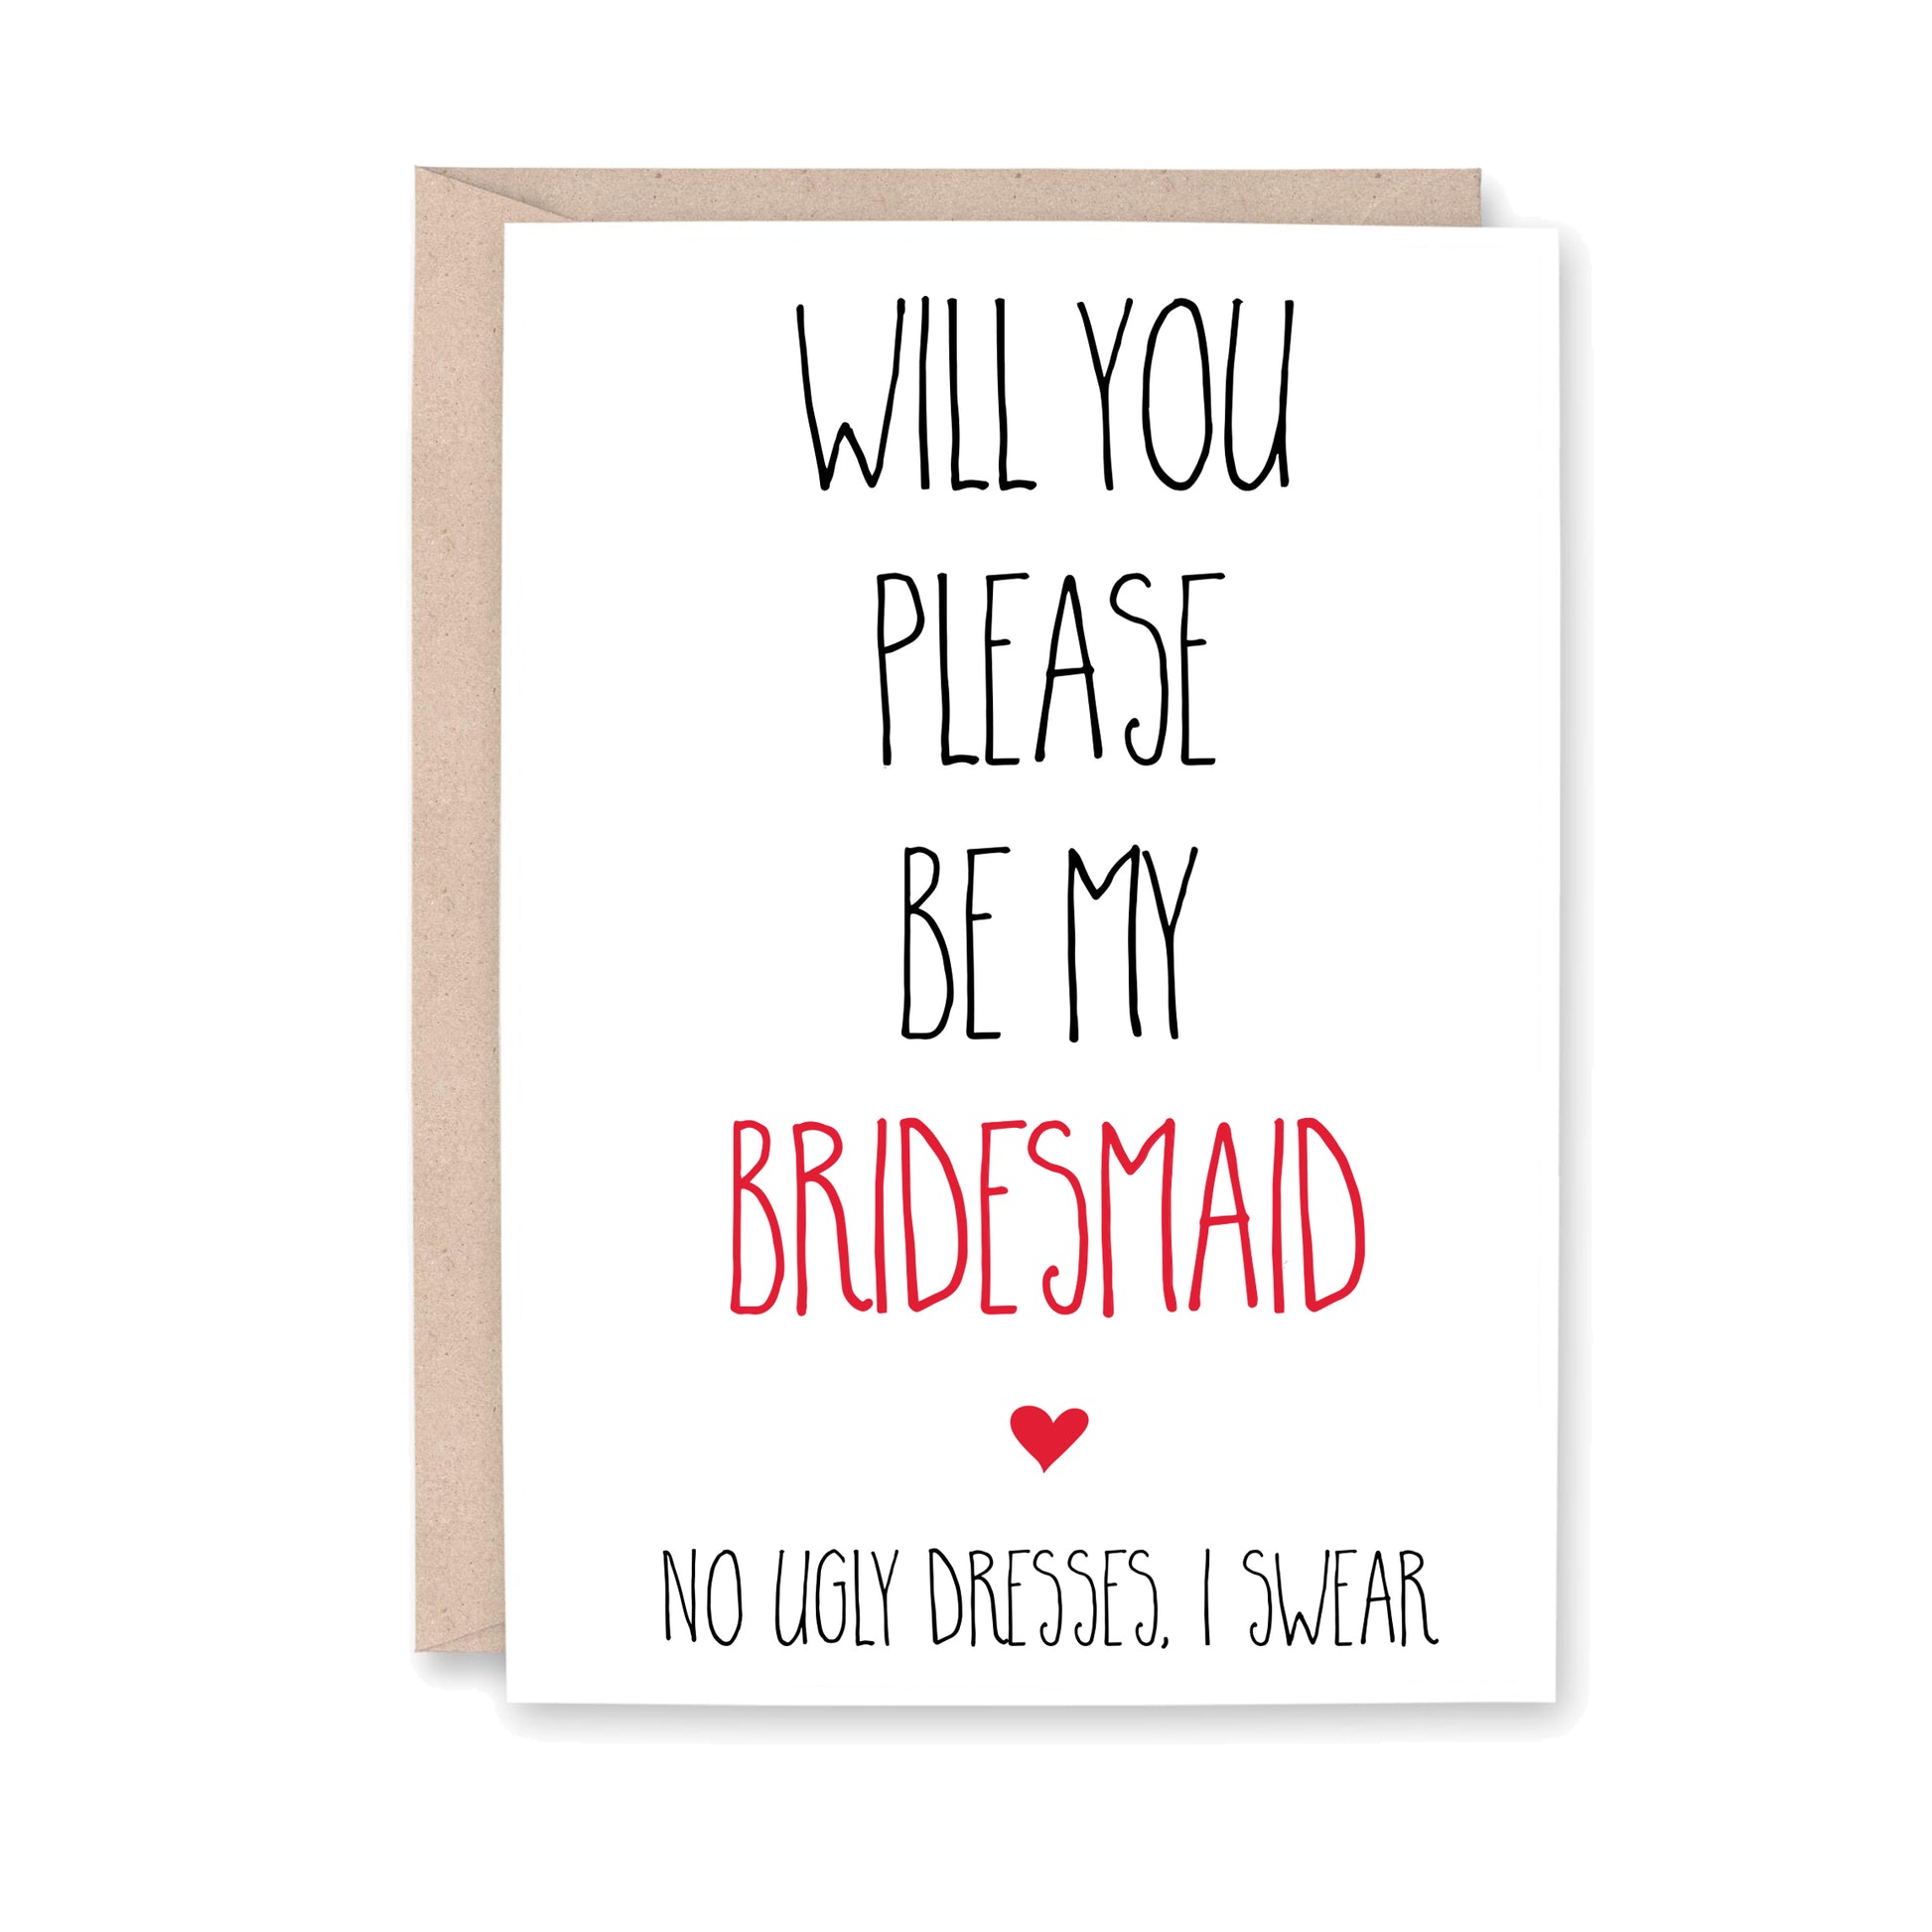 Will you please be my bridesmaid - no ugly dresses, I swear